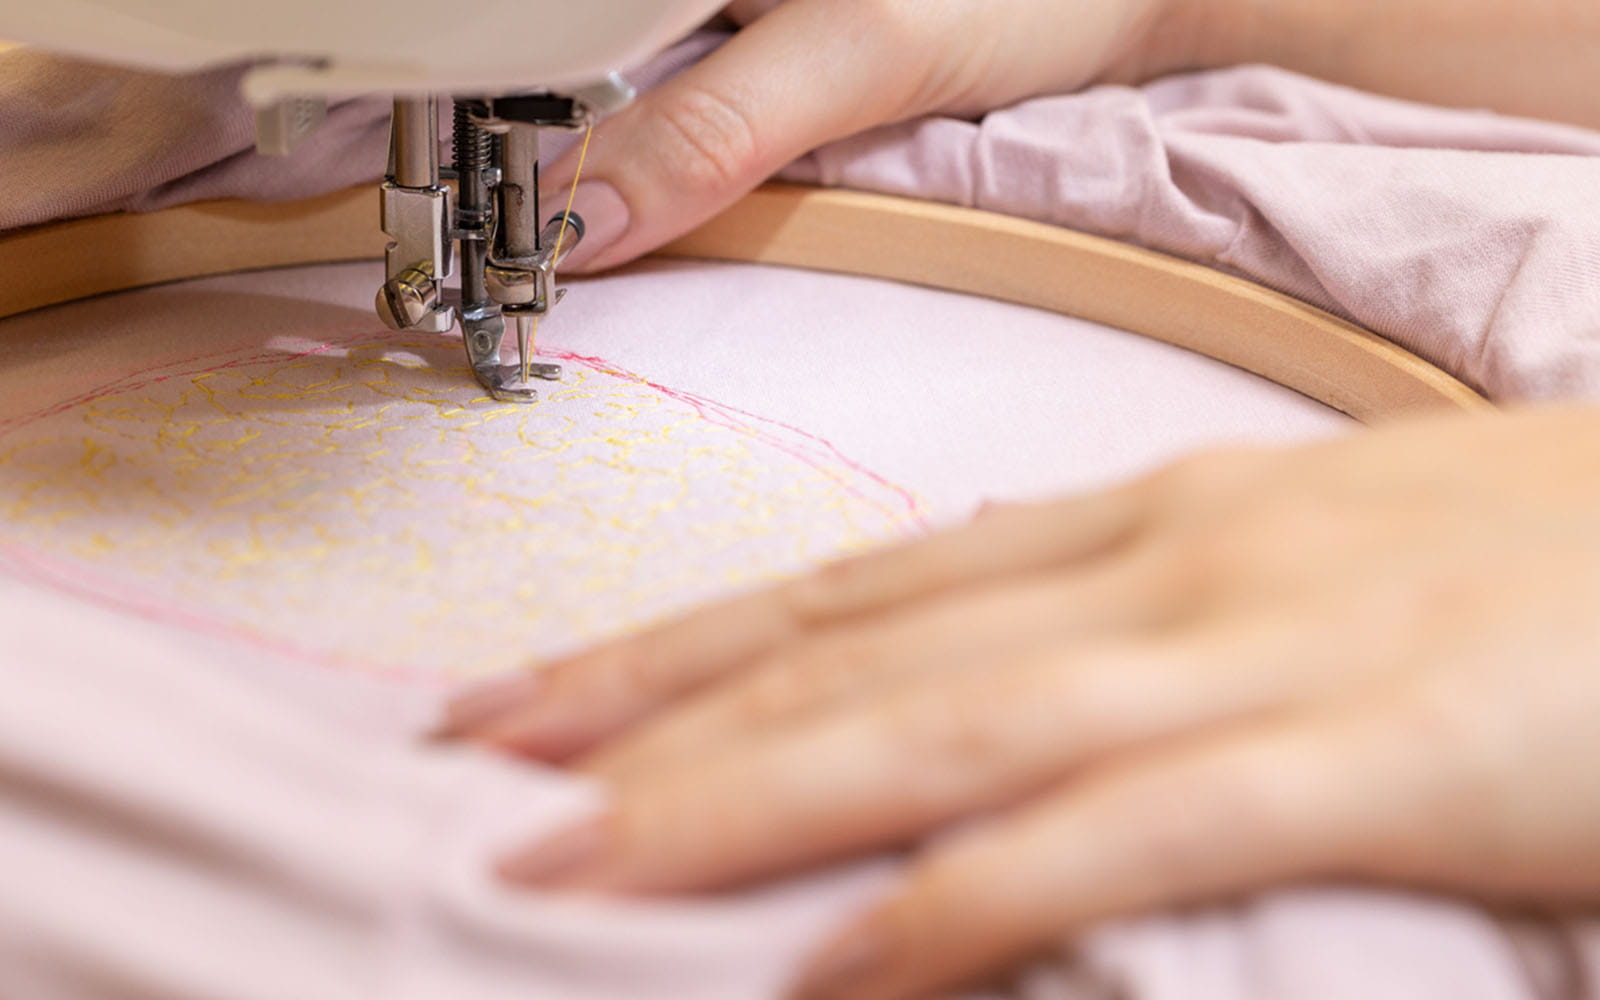 Hands holding wooden embroidery hoop stitching on sewing machine